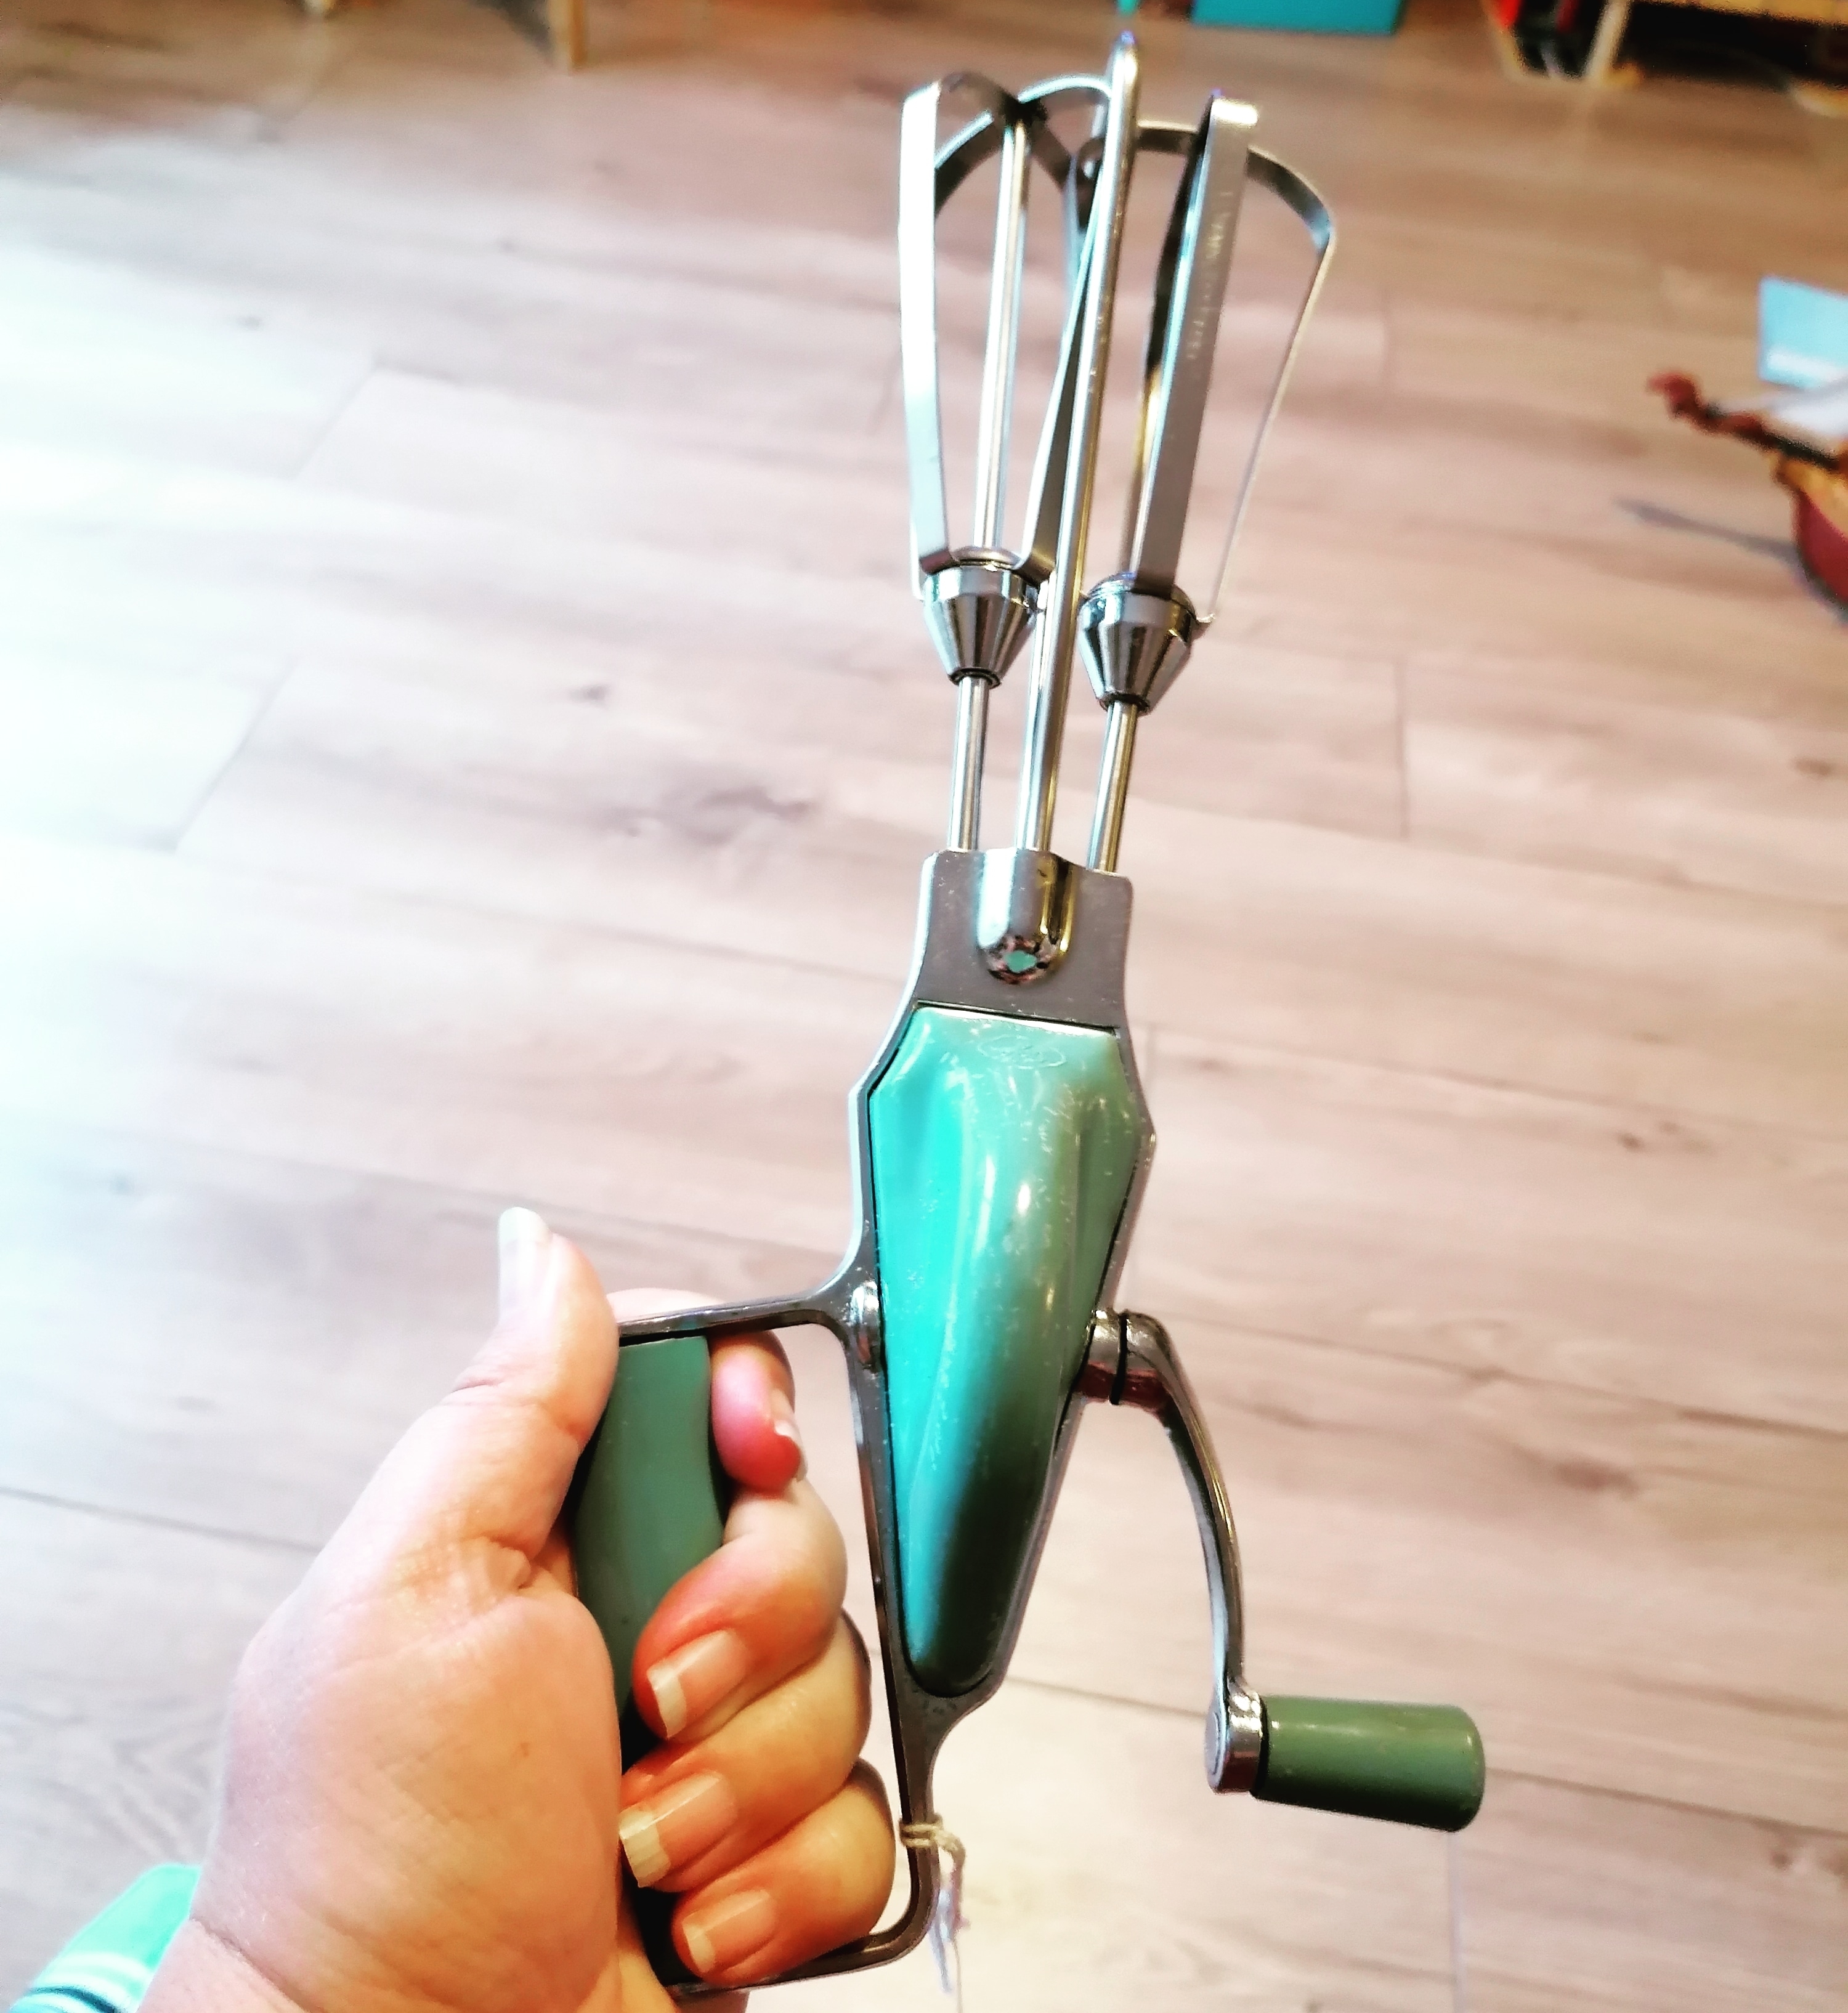 person holding a hand mixer with a lever for spinning it